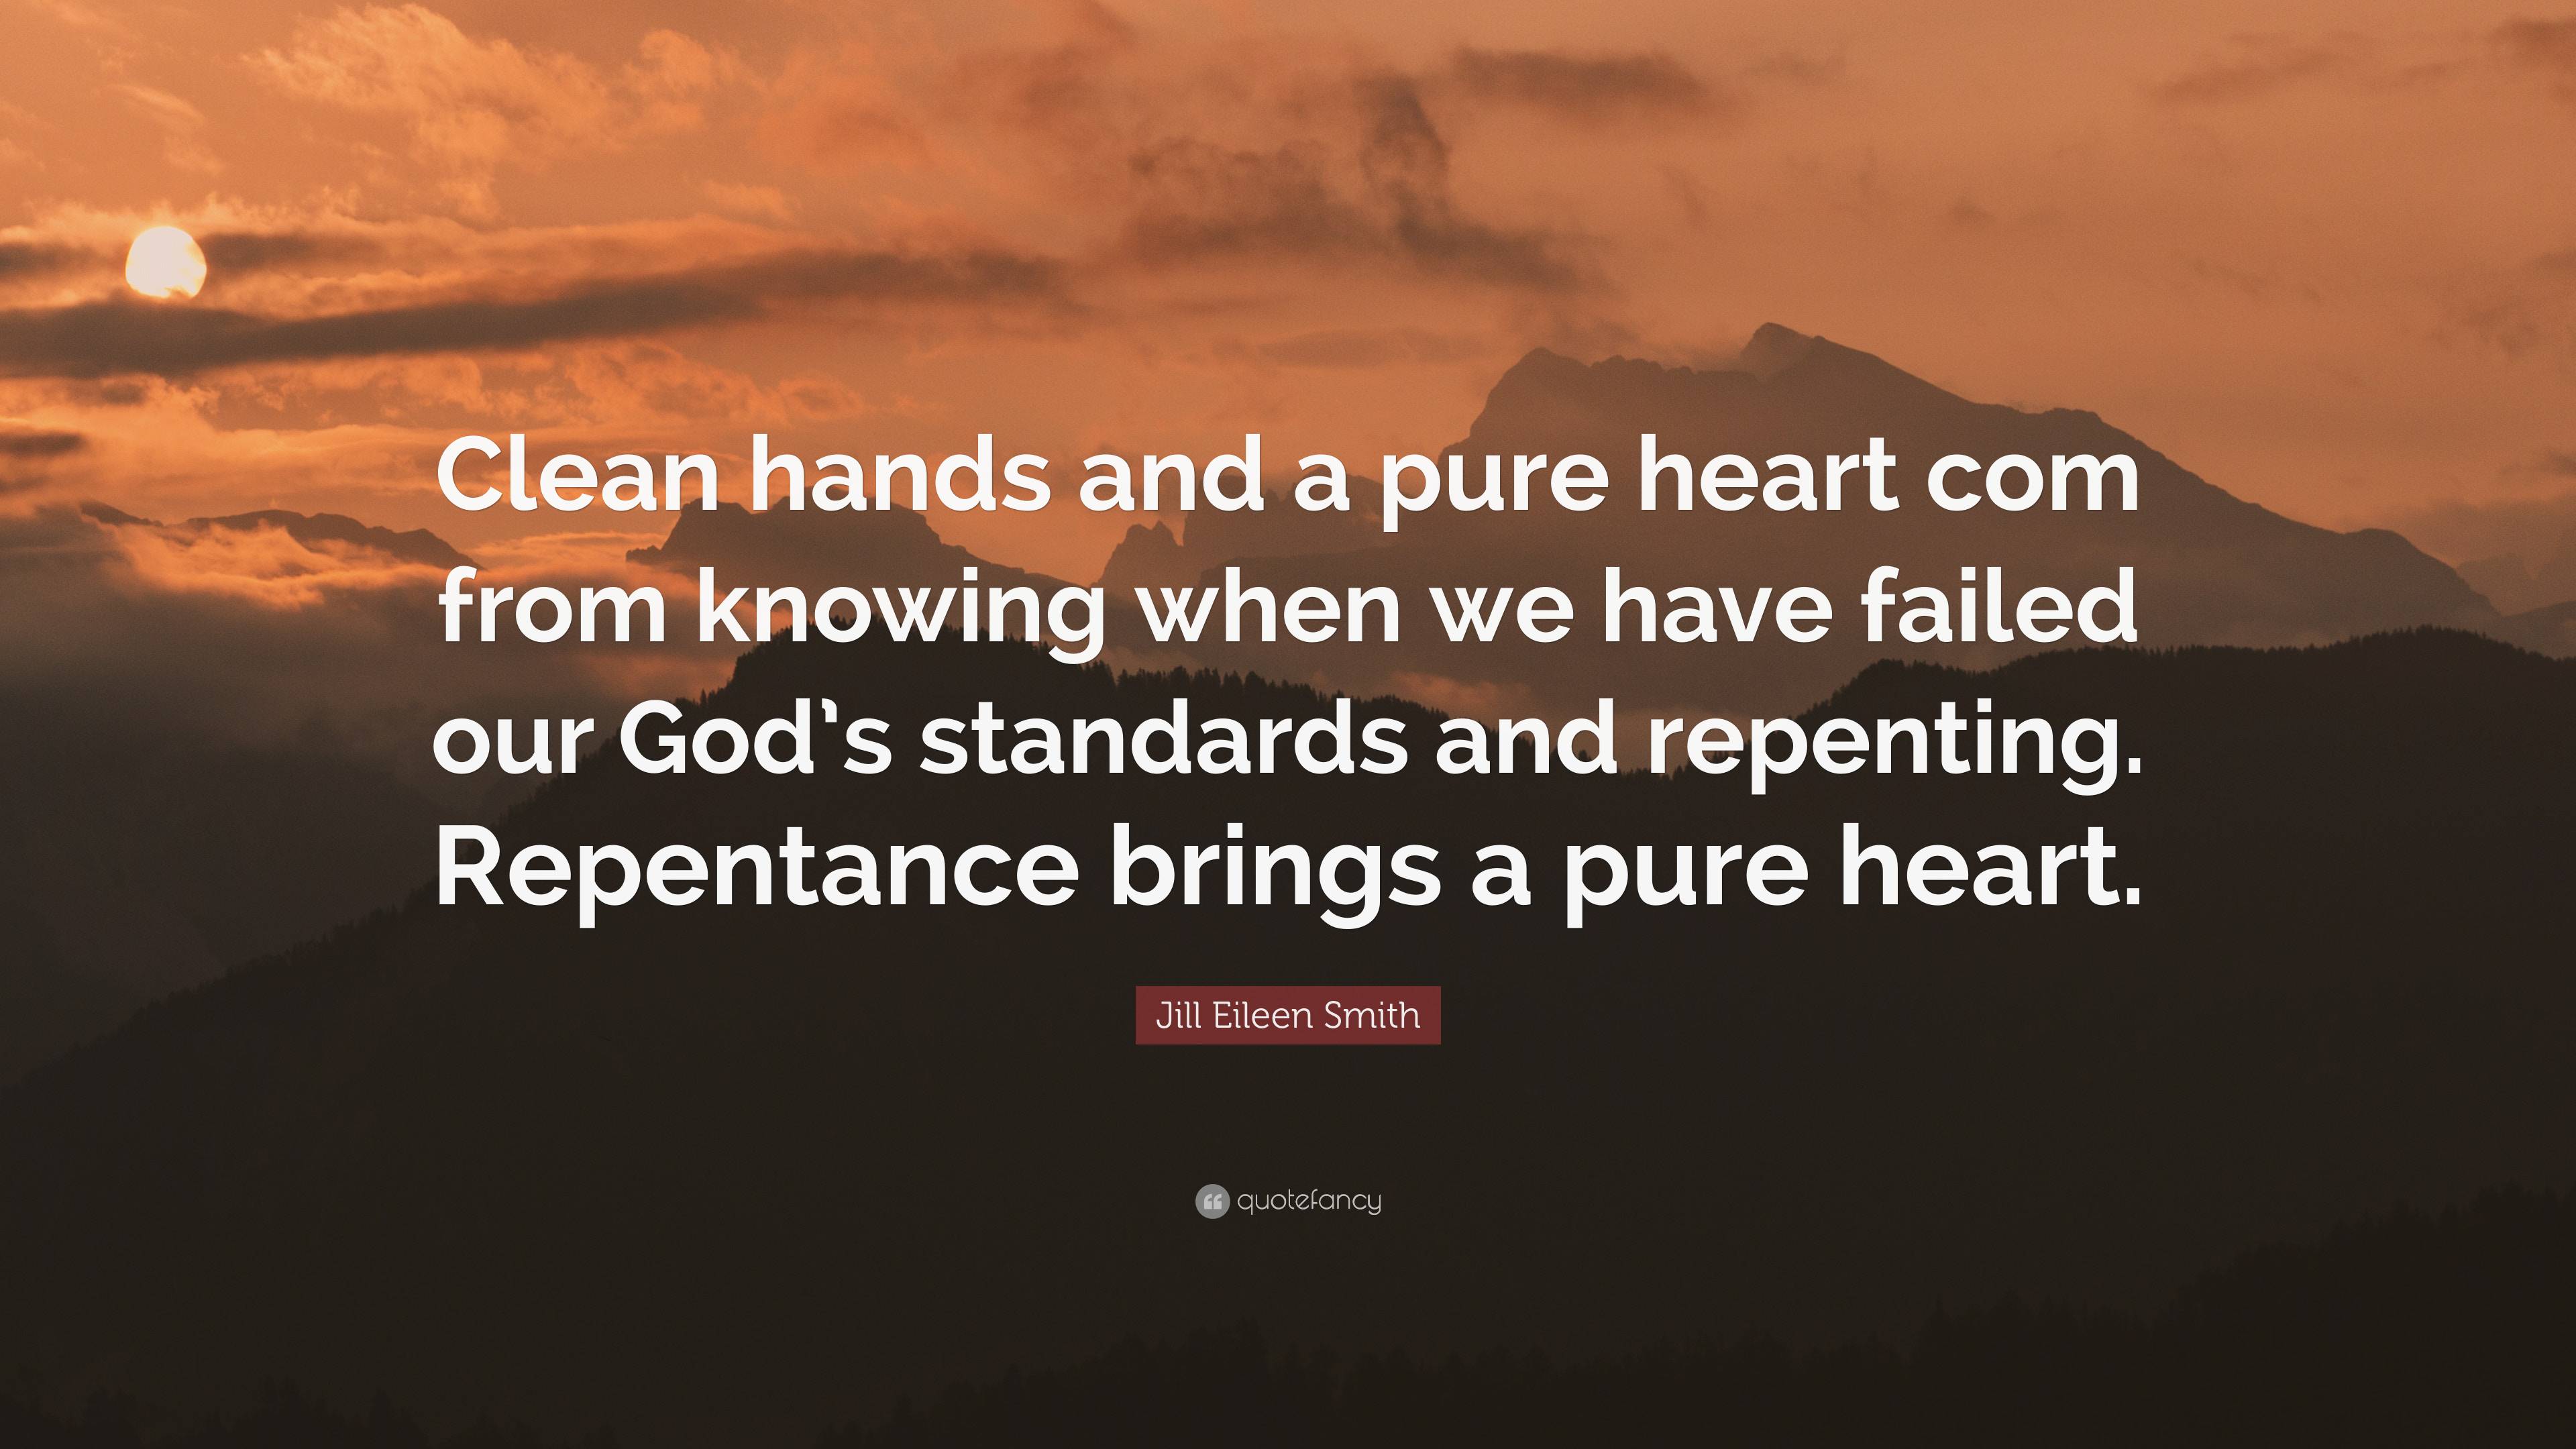 clean hands and a pure heart verses